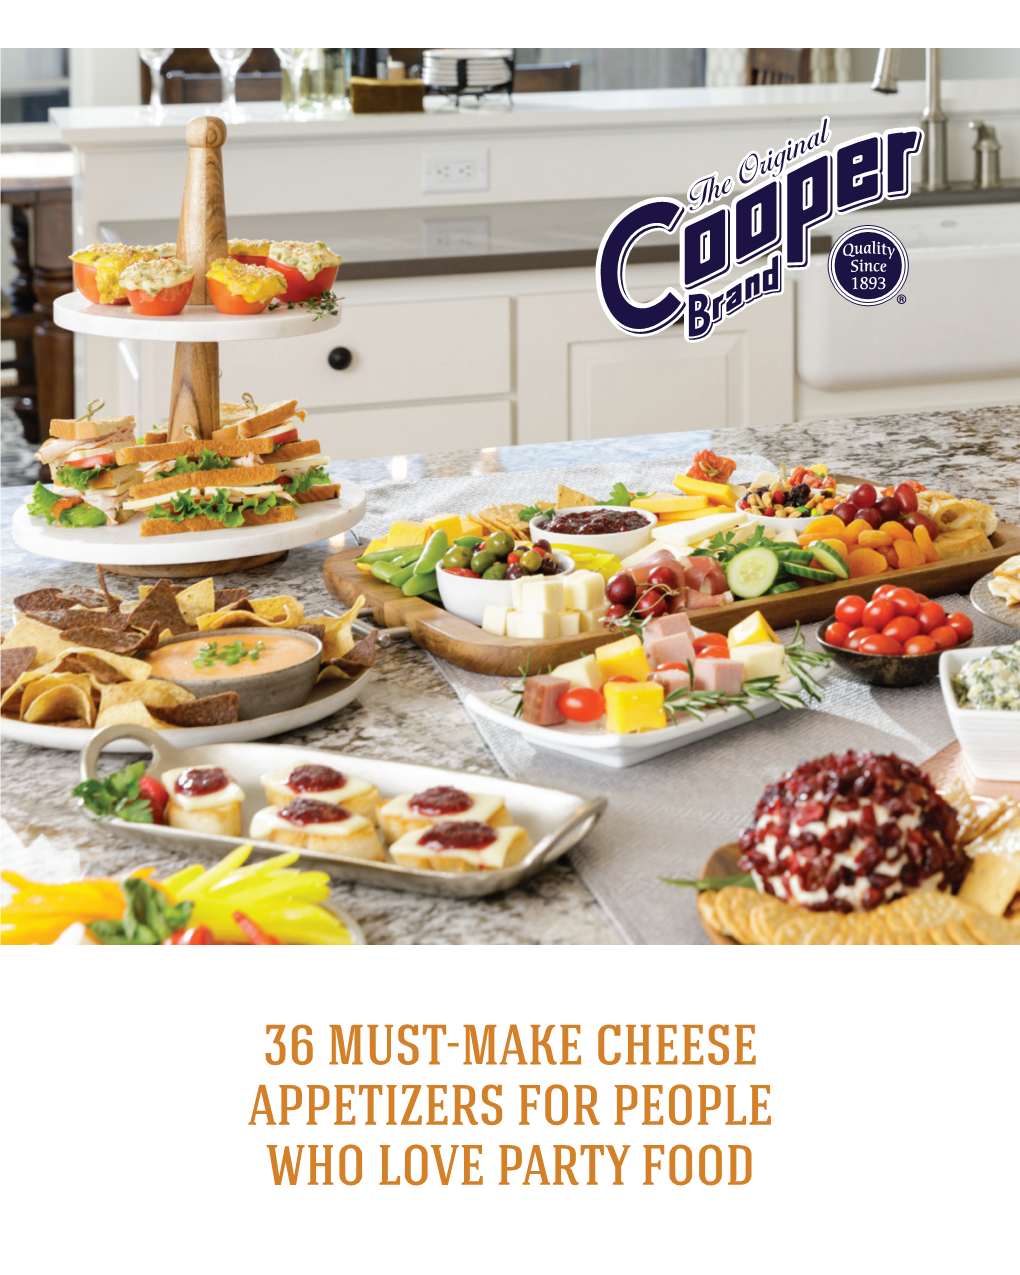 36 MUST-MAKE CHEESE APPETIZERS for PEOPLE WHO LOVE PARTY FOOD Mmm